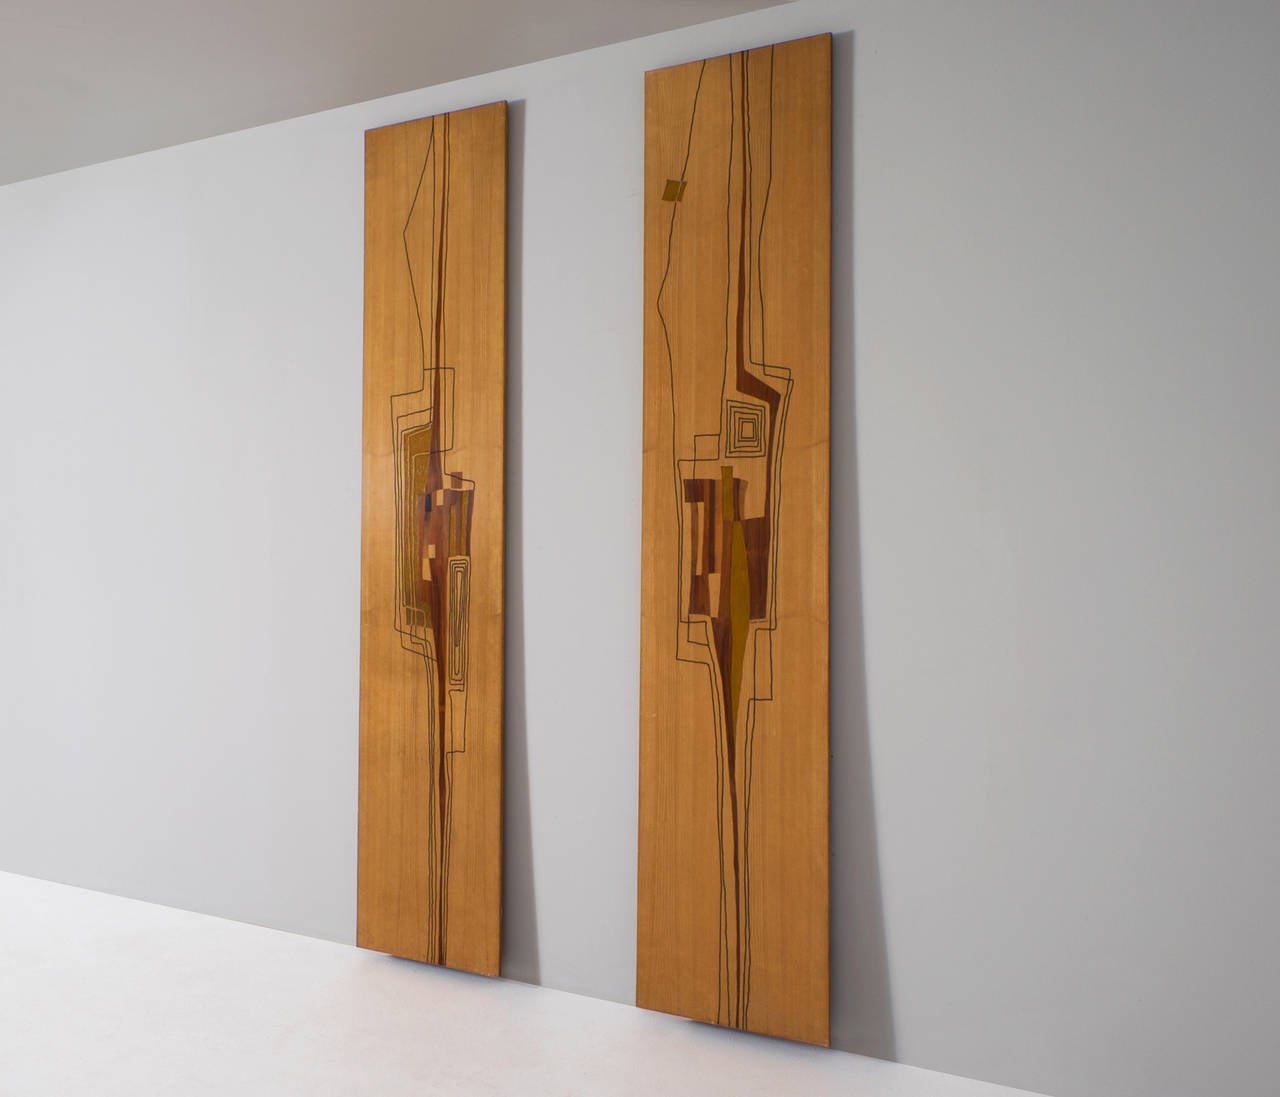 Two decorative wall panels by Marcello Siard, made in 1961.

These two wonderful decorative wall panels, titled 'Pannello', were handmade and signed by the Italian designer Marcello Siard. 
The fairly large wooden panels have been beautifully